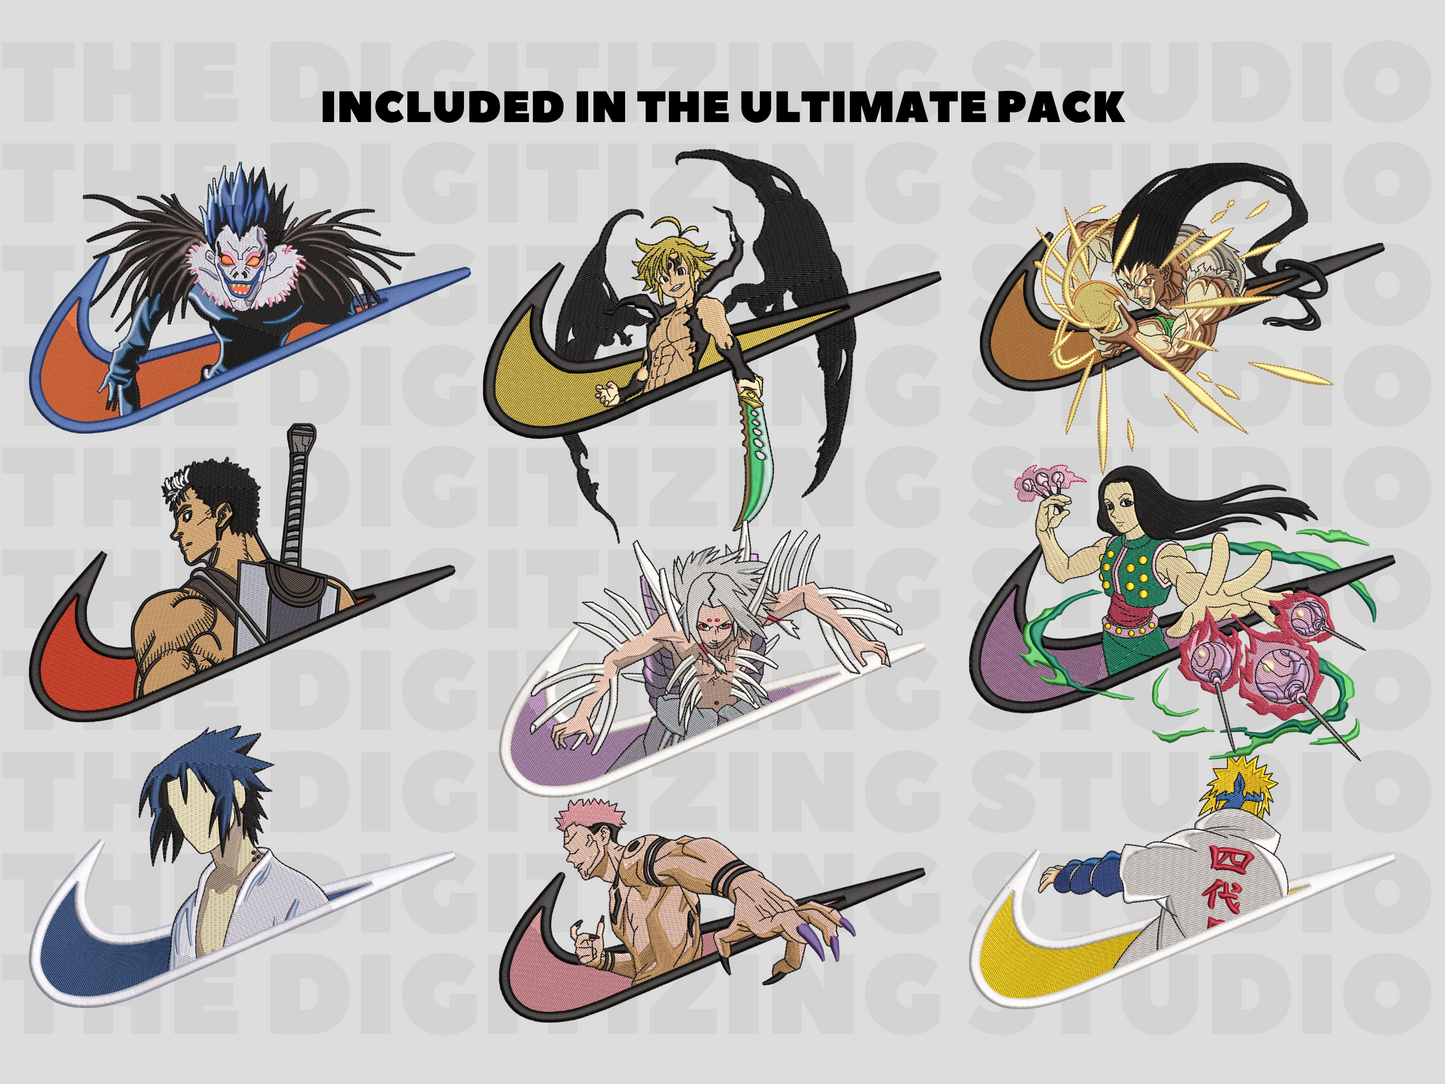 Anime Embroidery Superpack: 99 Designs + Free Exclusive Design